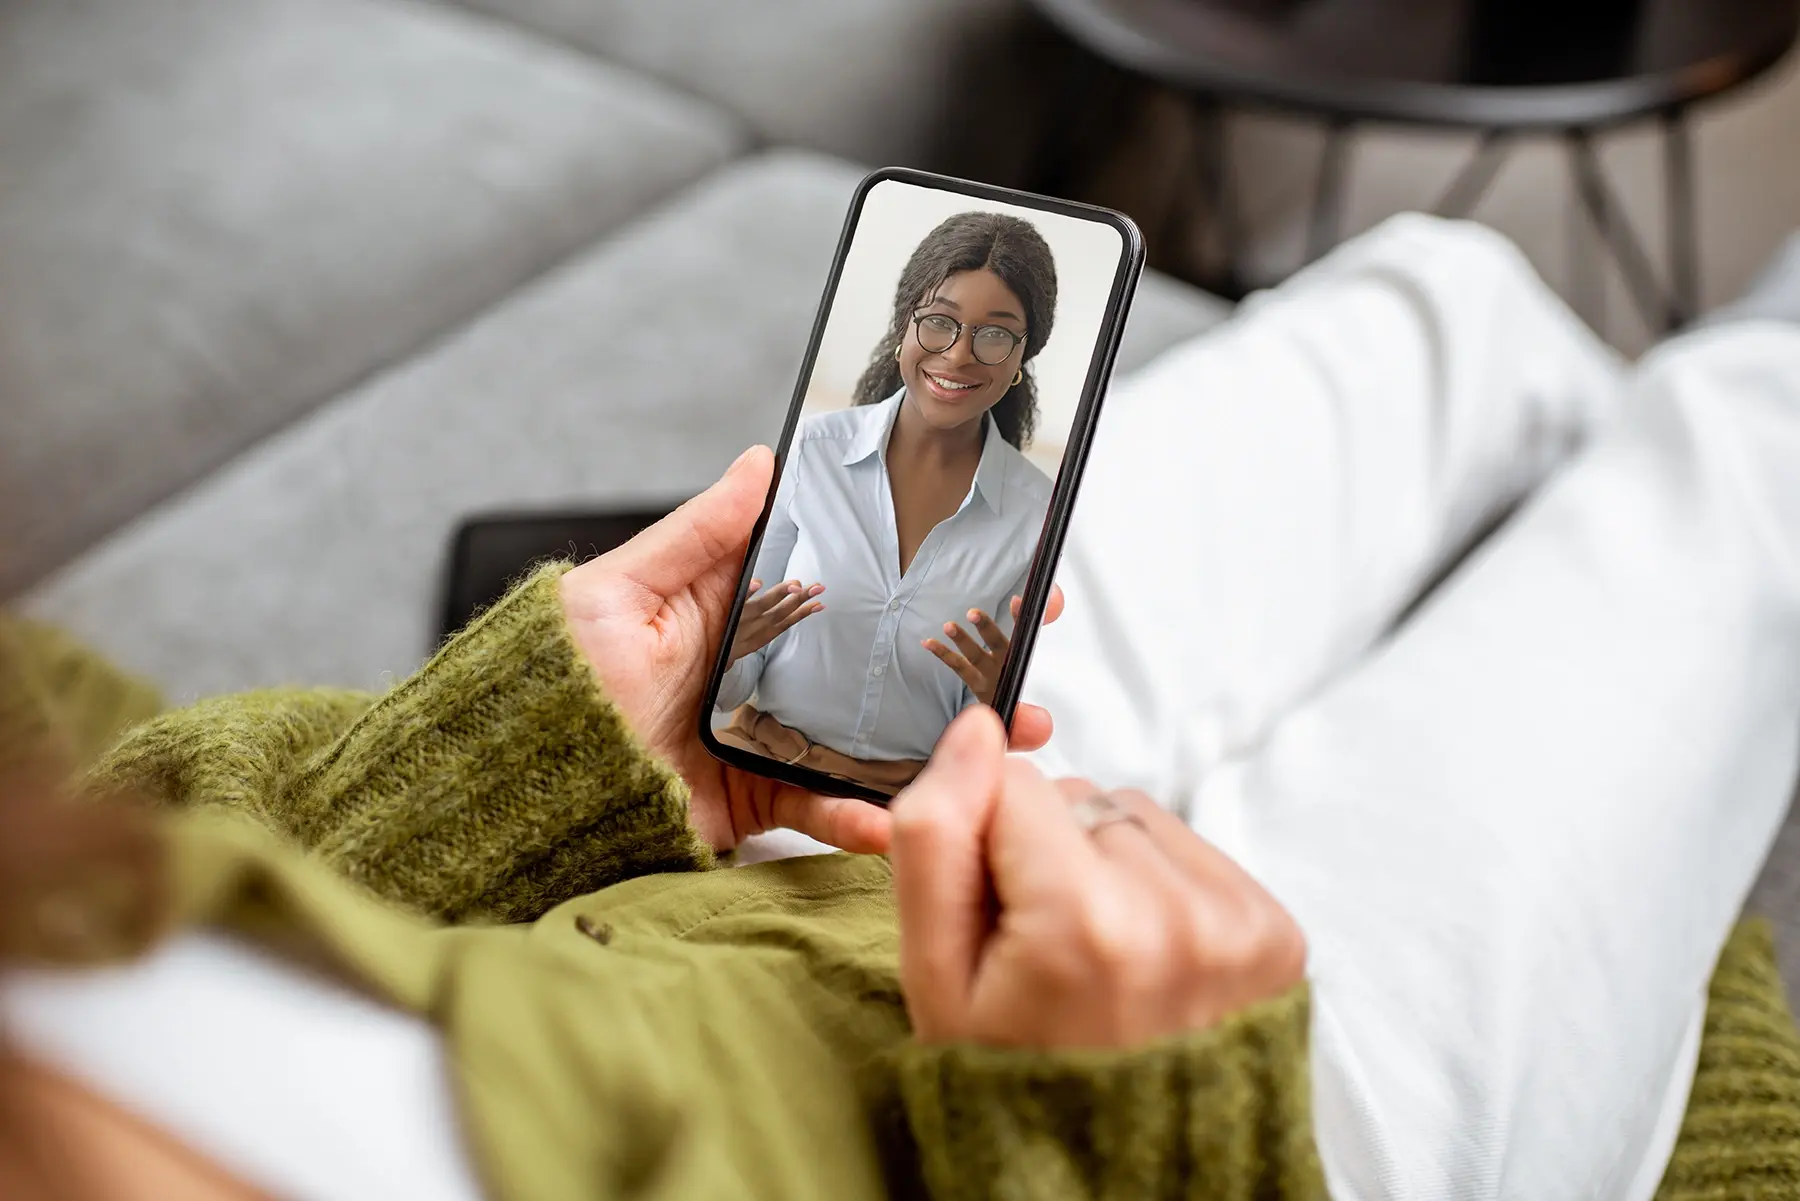 A woman is using a smartphone to take a video call with a medical professional.